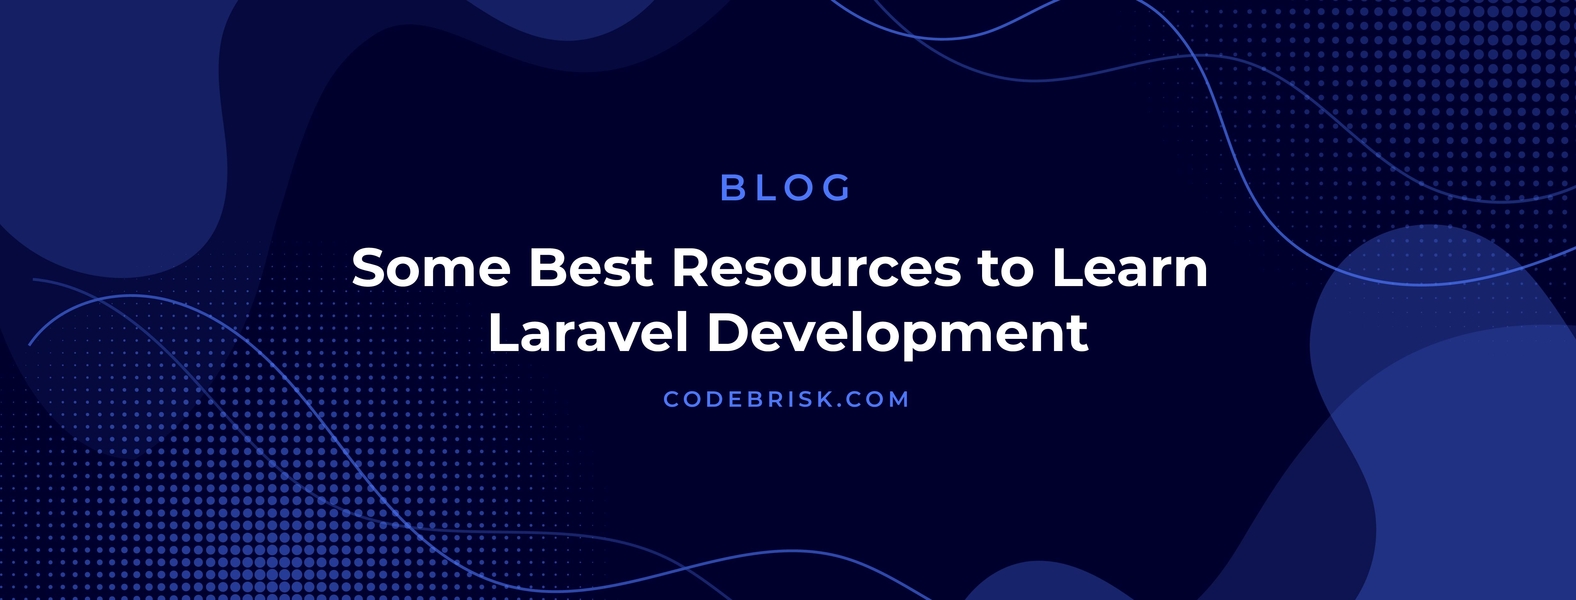 Some Best Resources to Learn Laravel Development cover image